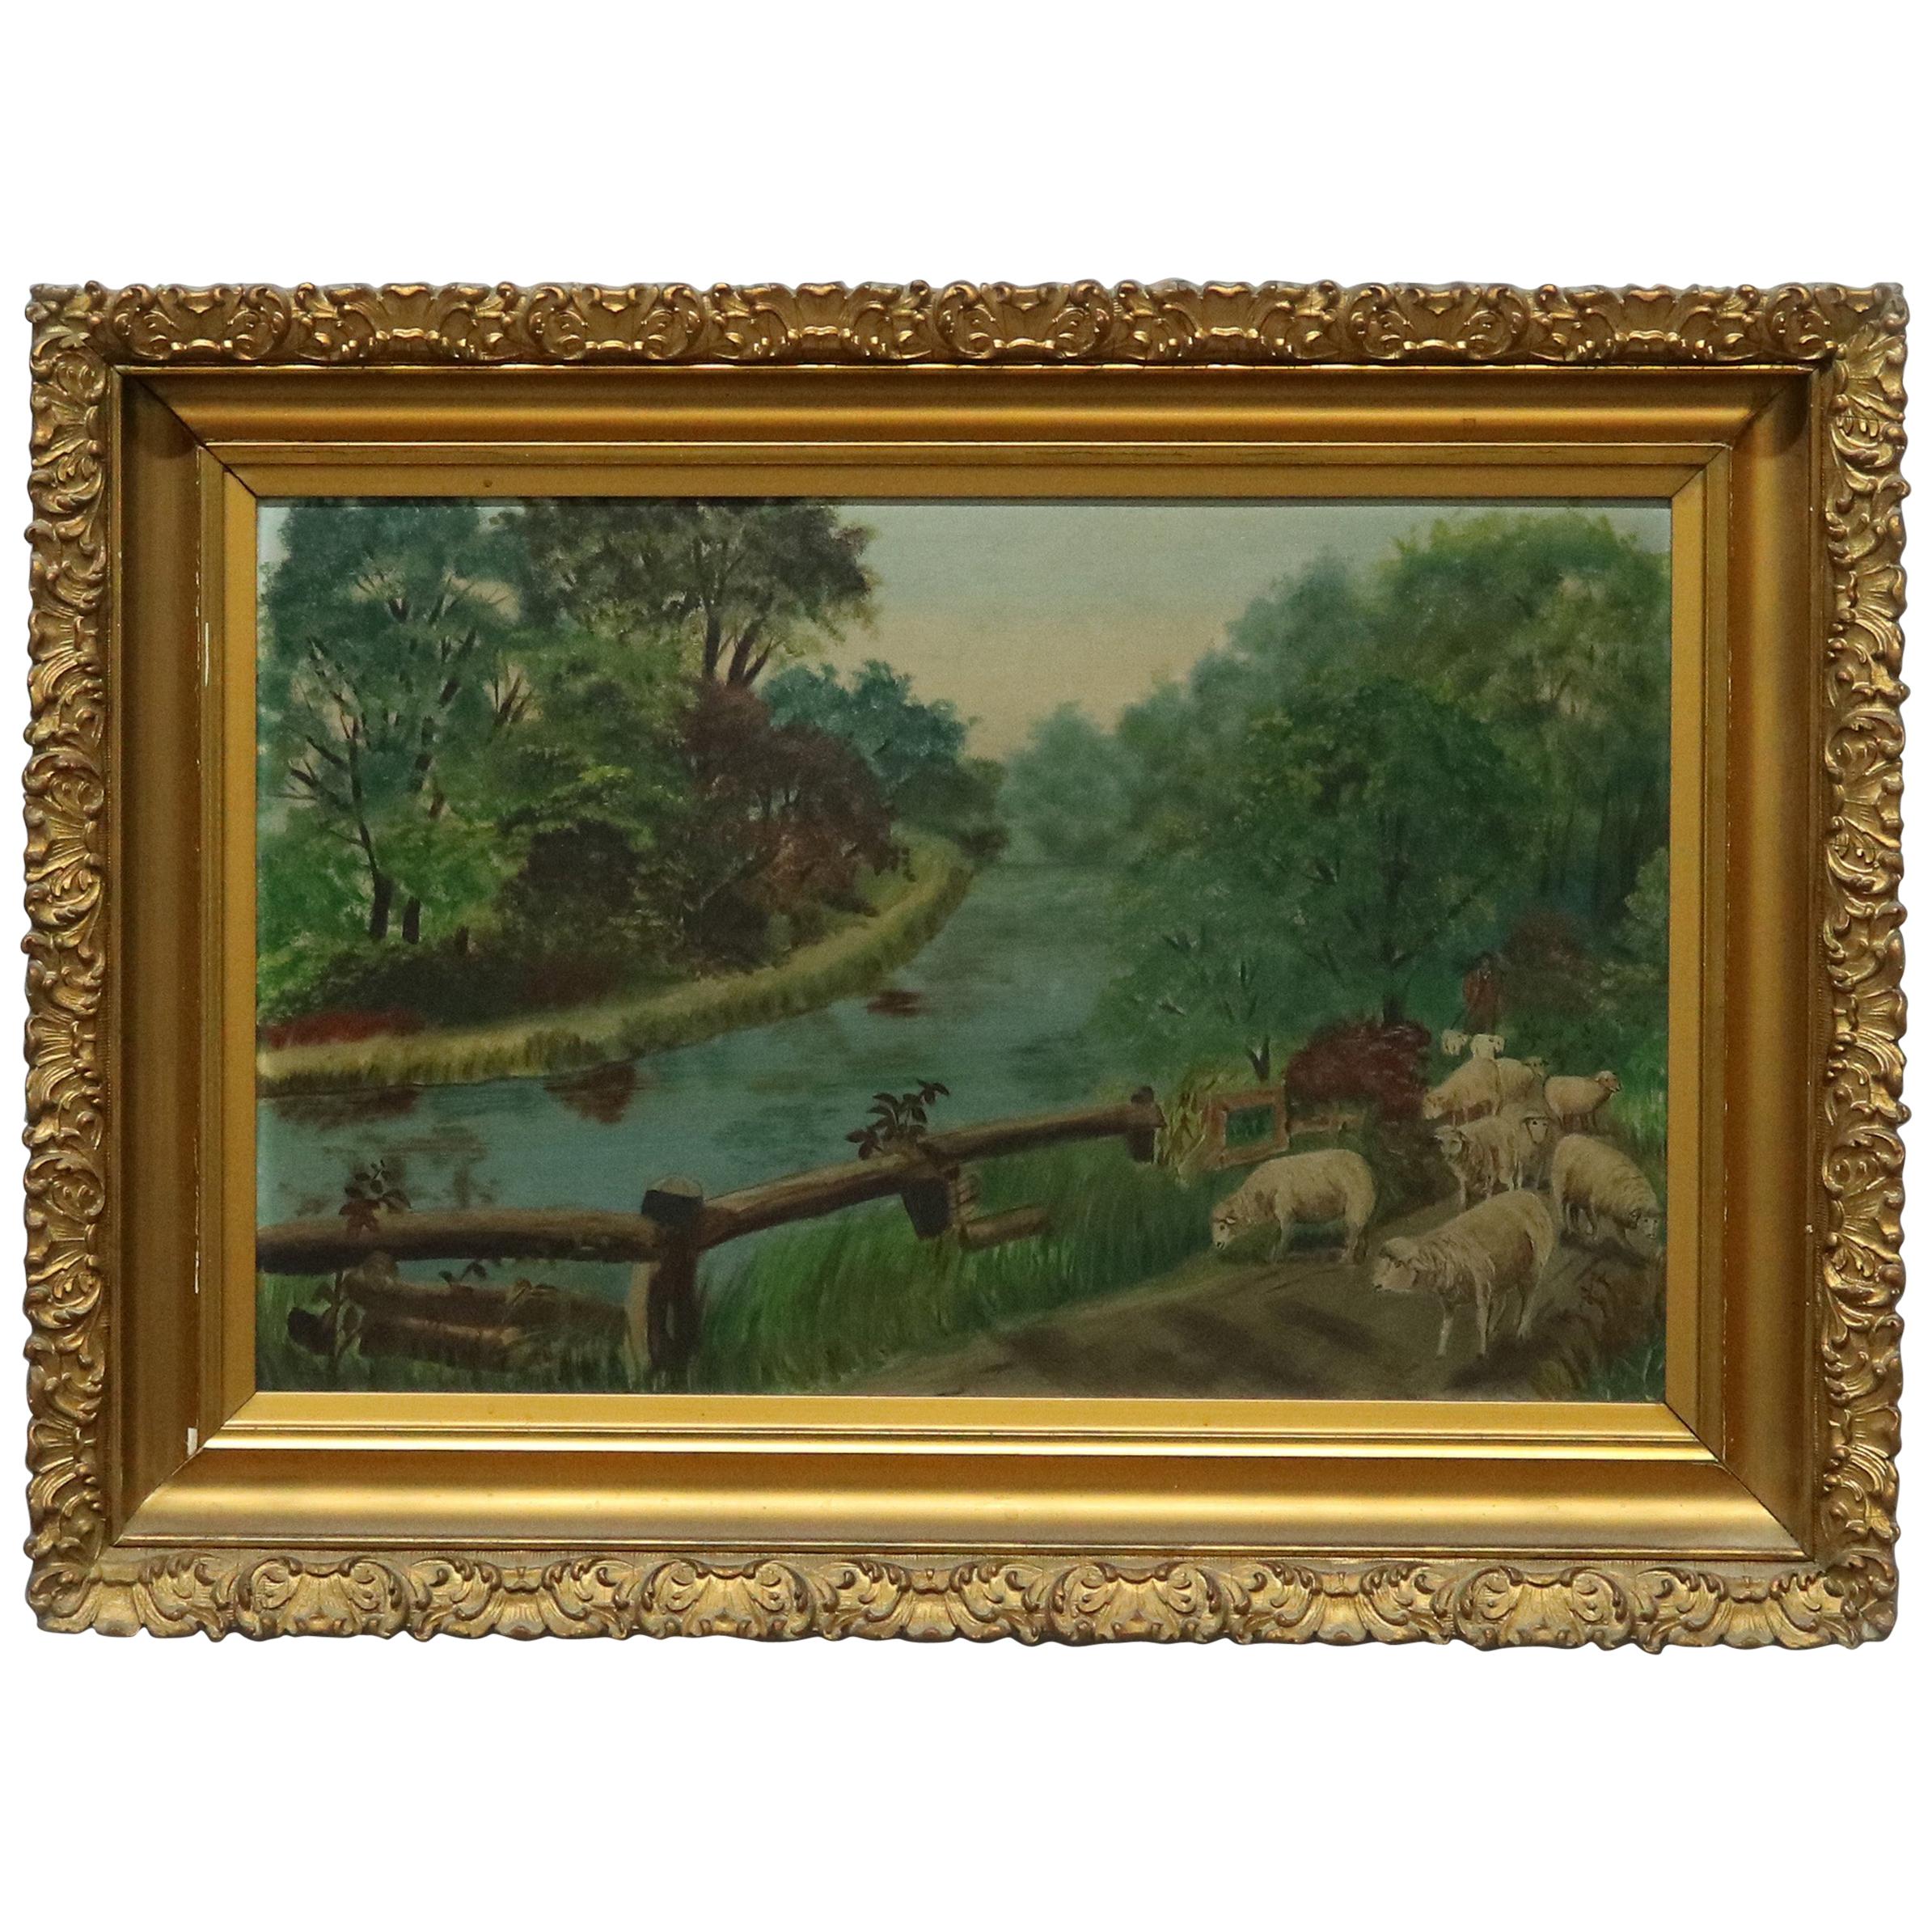 Antique Folk Art Landscape Oil Painting on Board with Sheep, Circa 1890